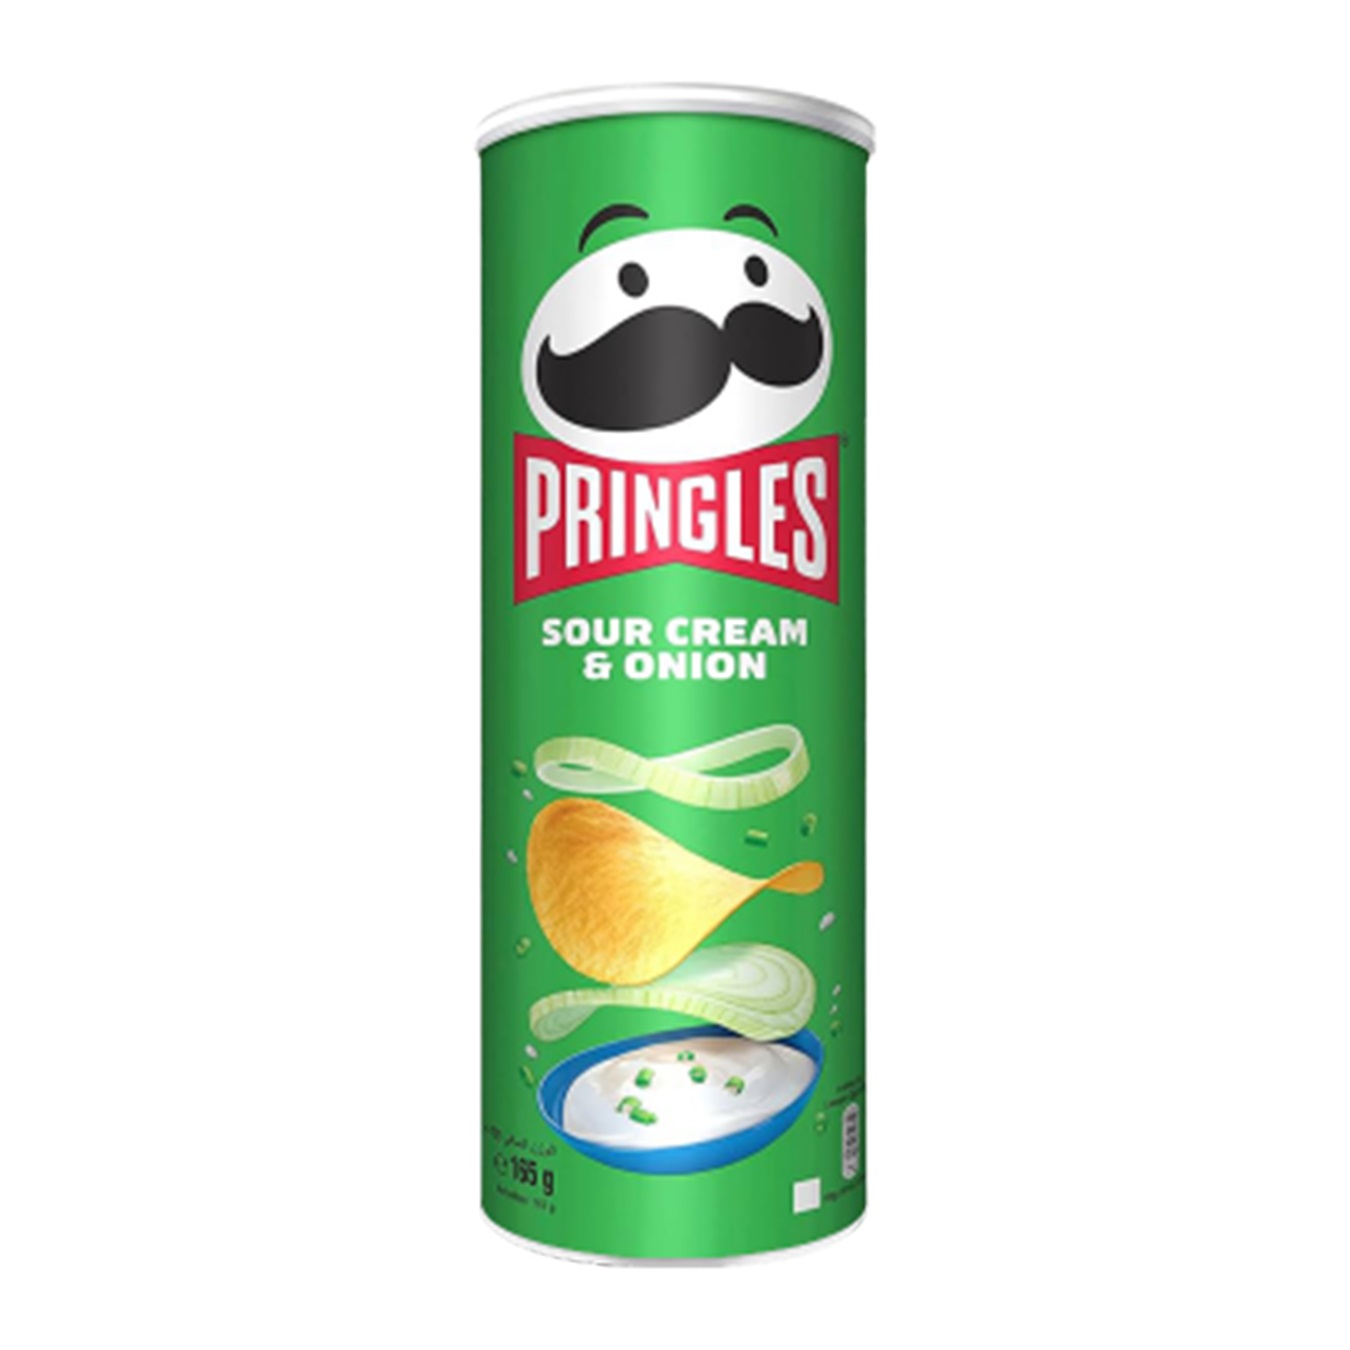 Pringles Potato chips with sour cream and onion taste 165g